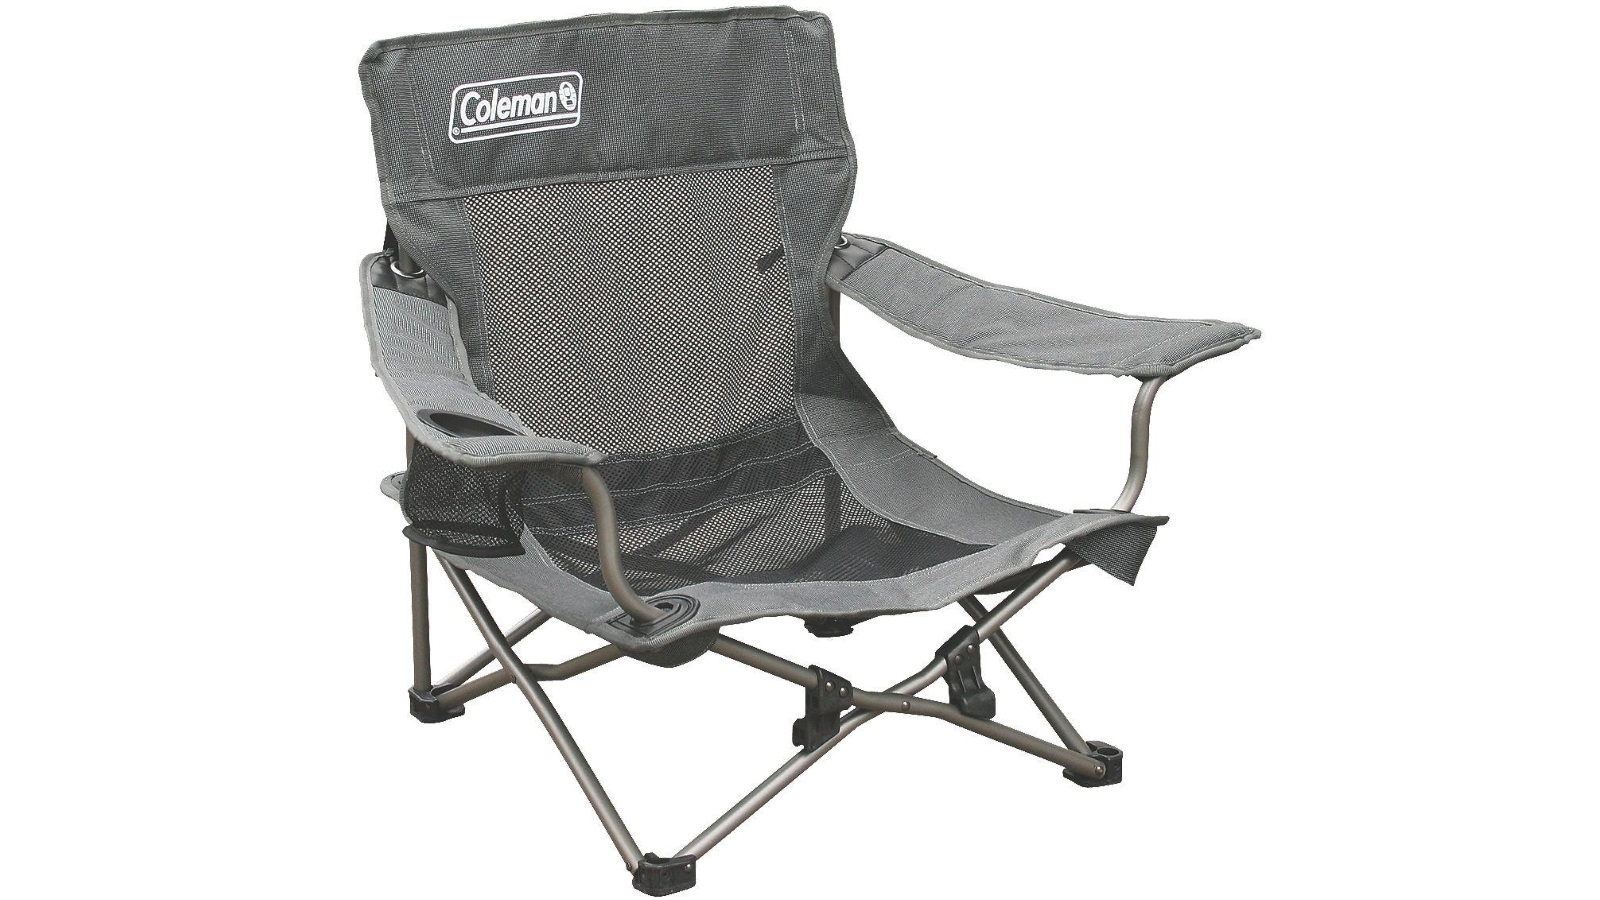 Outdoor Chair Cot Converta Coleman Suspension Camping Lounge Convertible Yard for sale online 